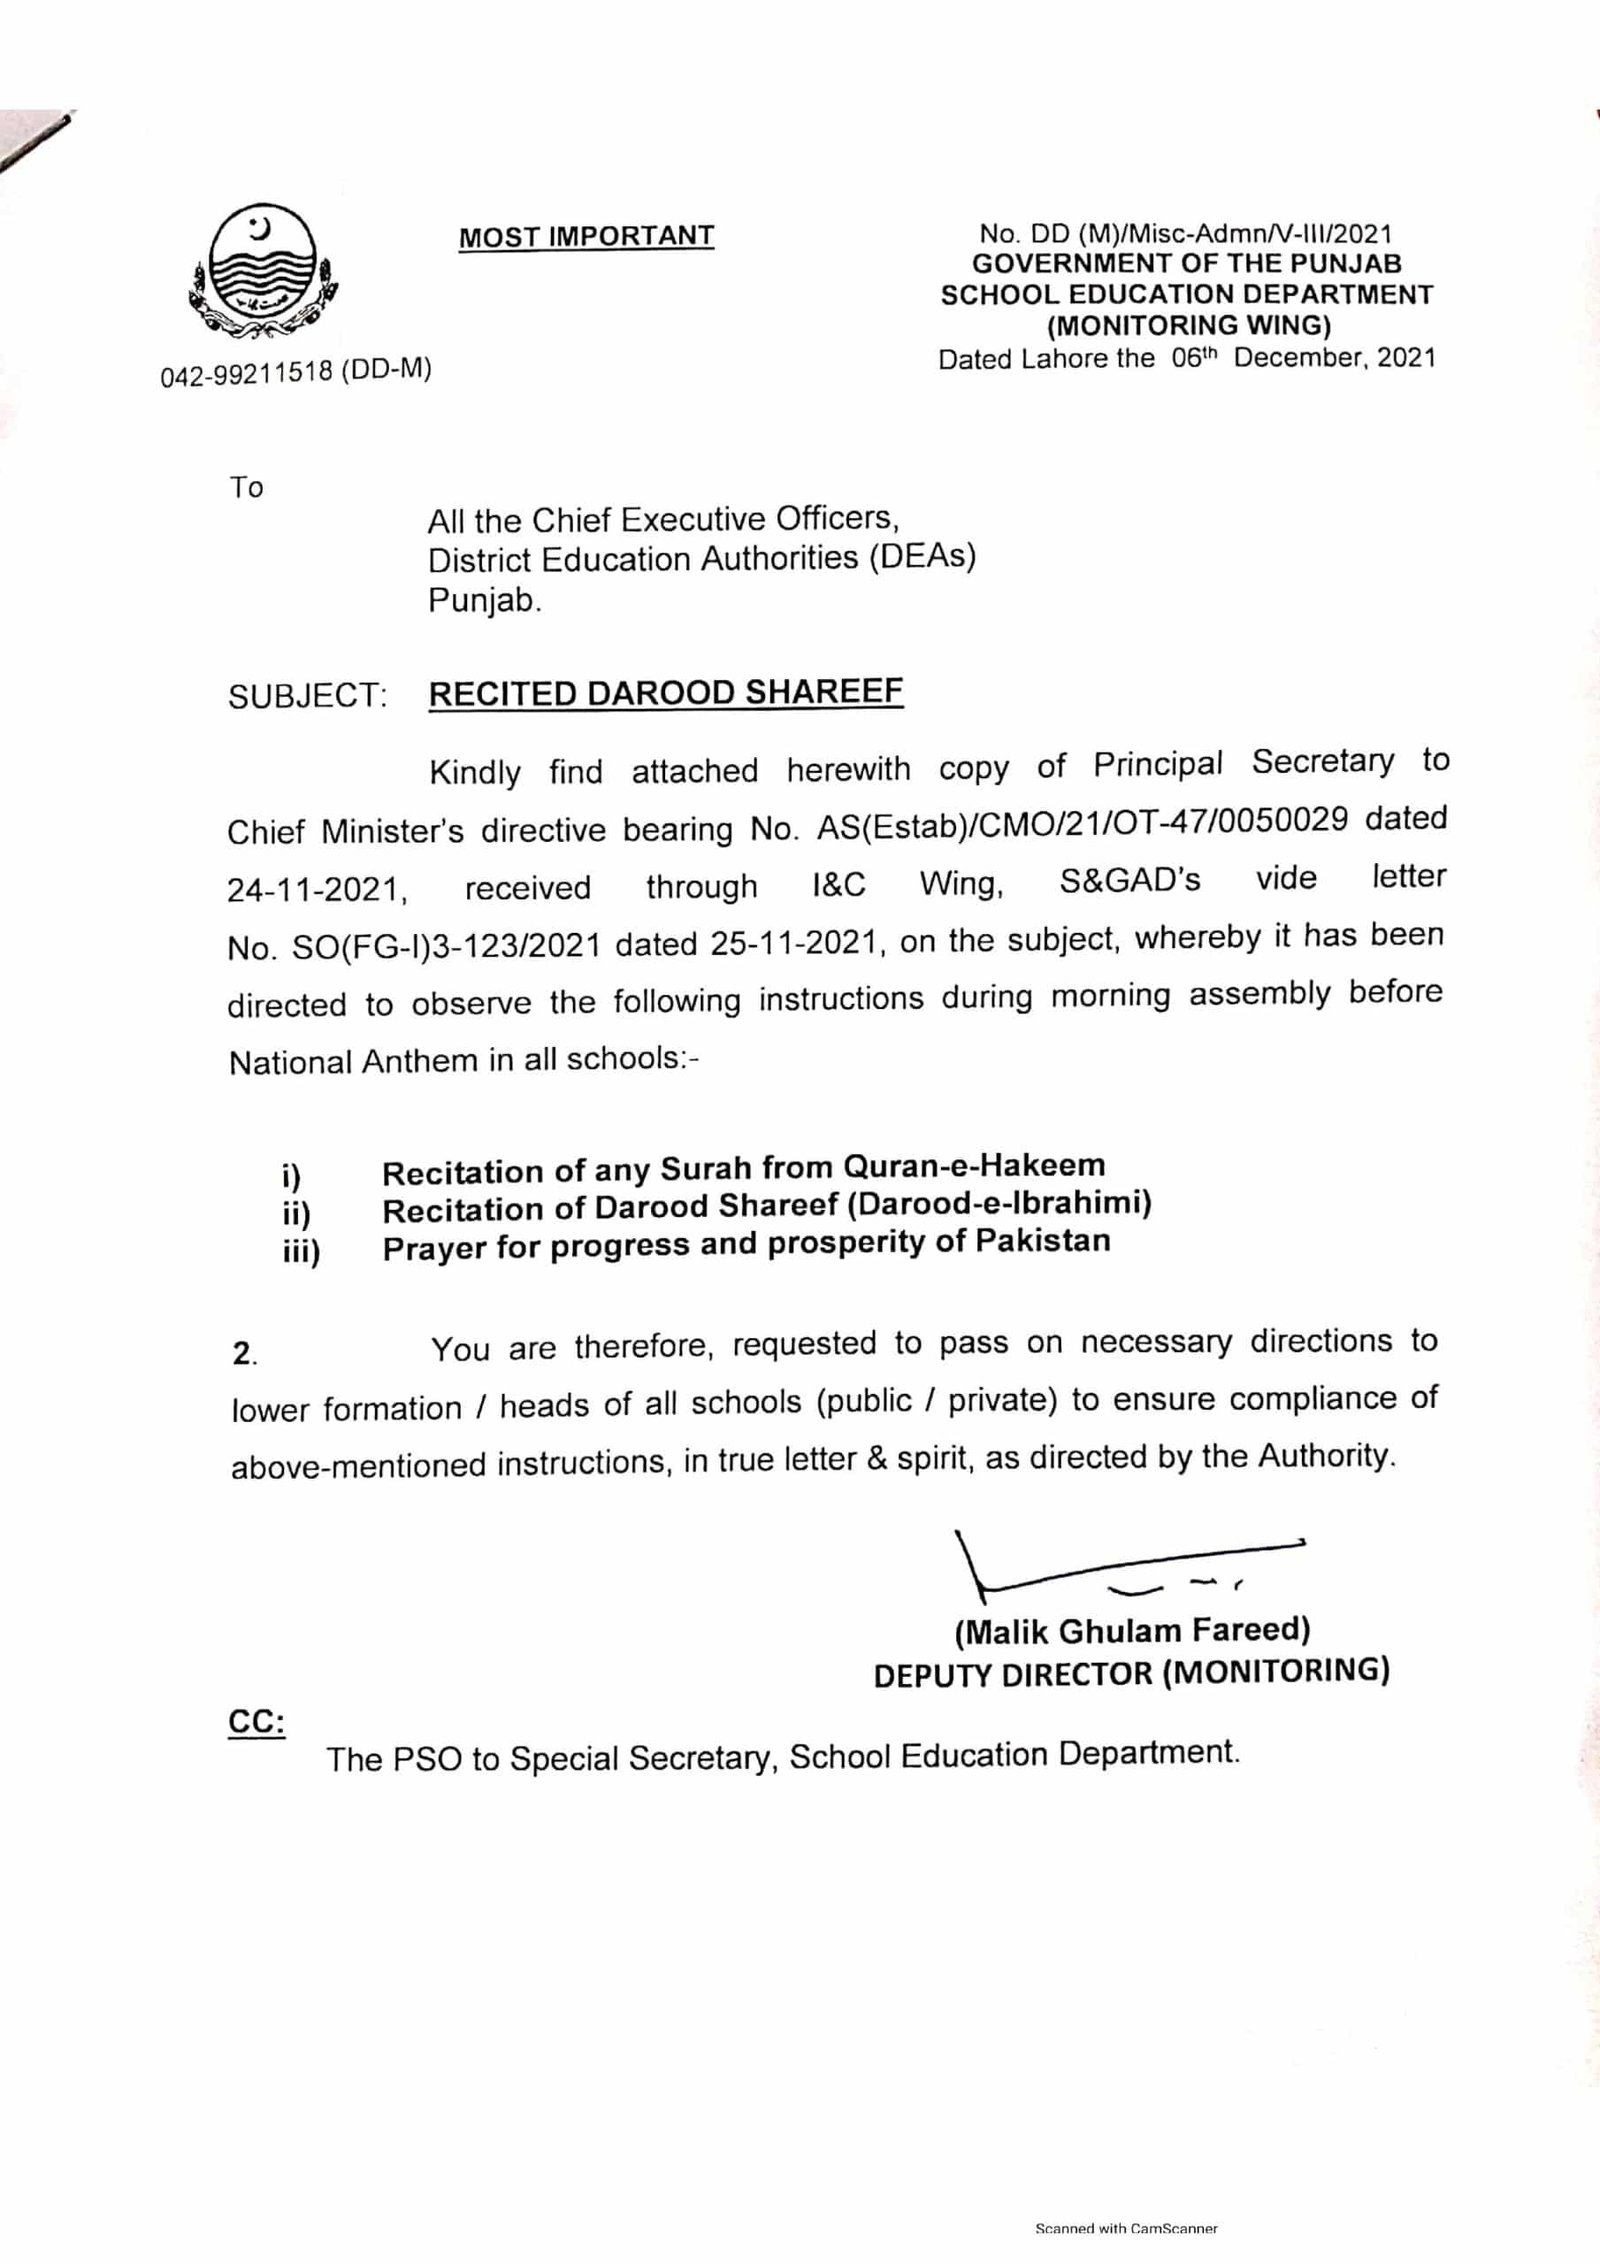 Notification of Recitation of Darood Shareef in all Public / Private Schools